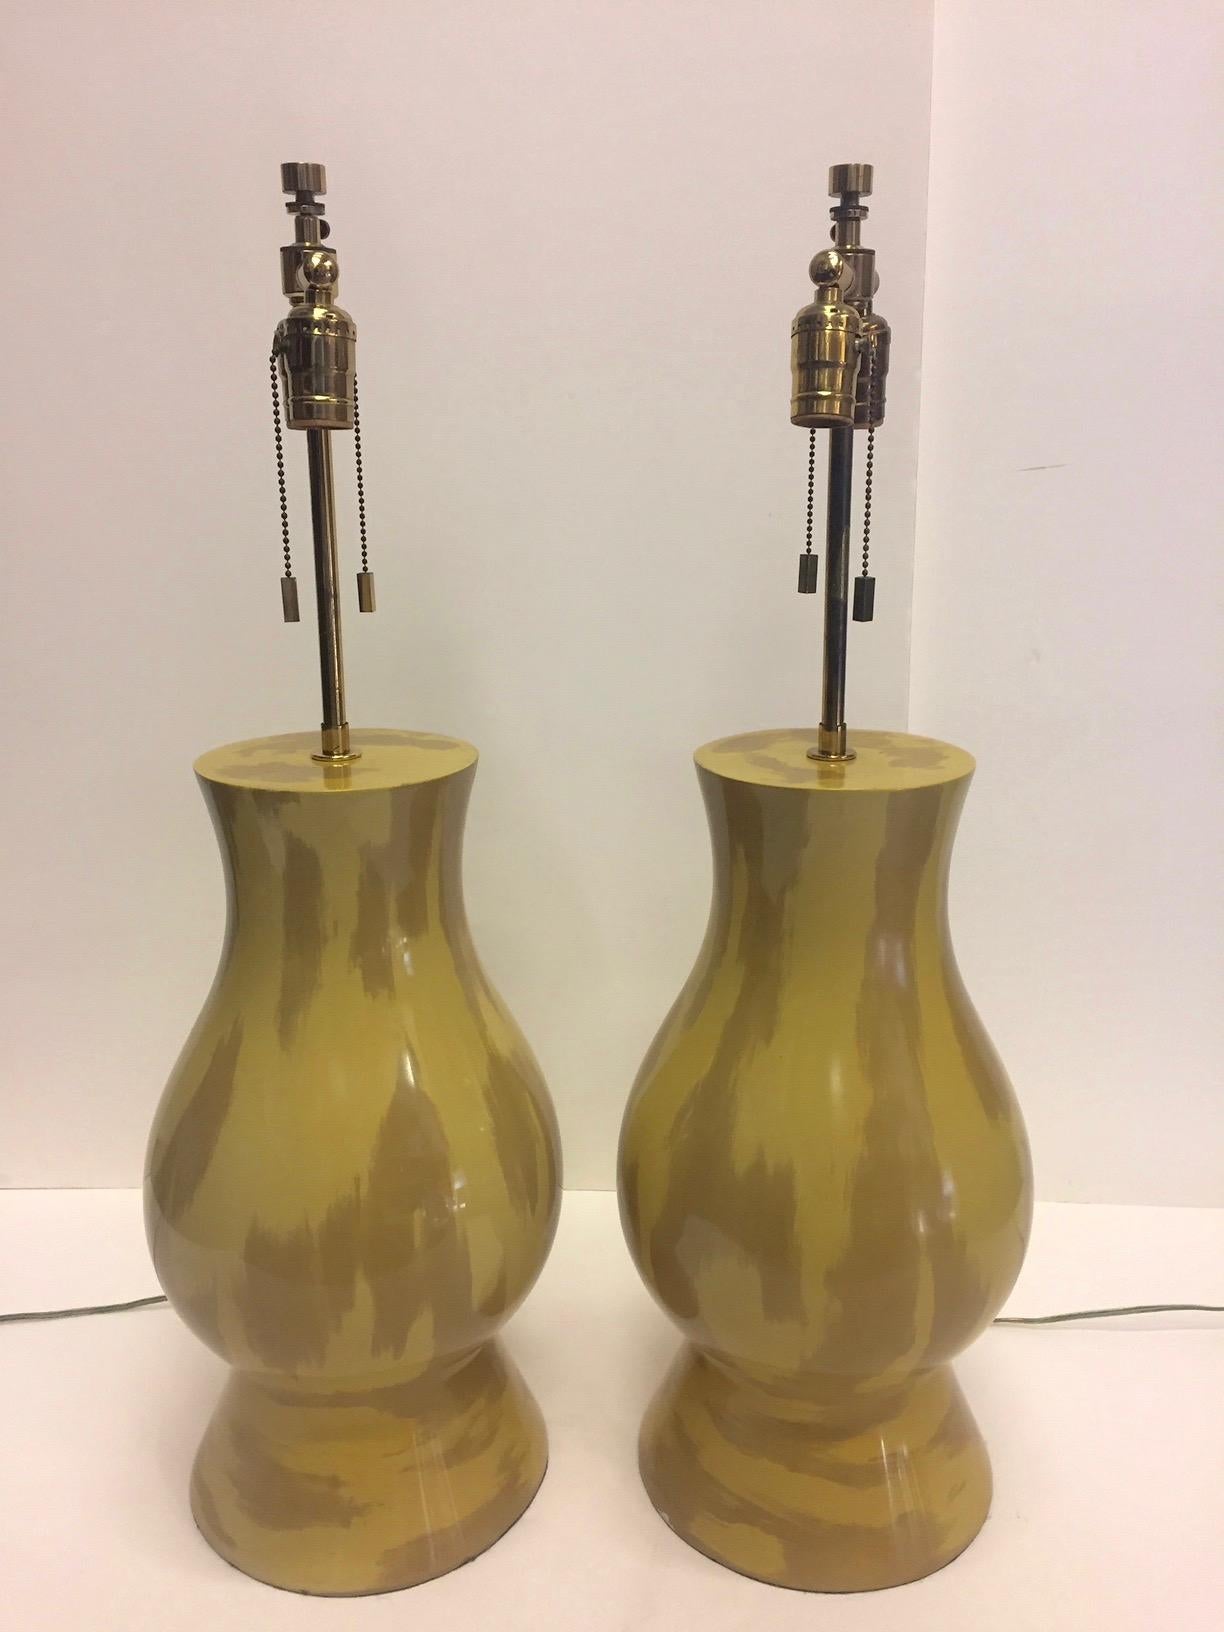 Rare Collectible Pair of Karl Springer Mustard and Khaki Ceramic Lamps For Sale 2